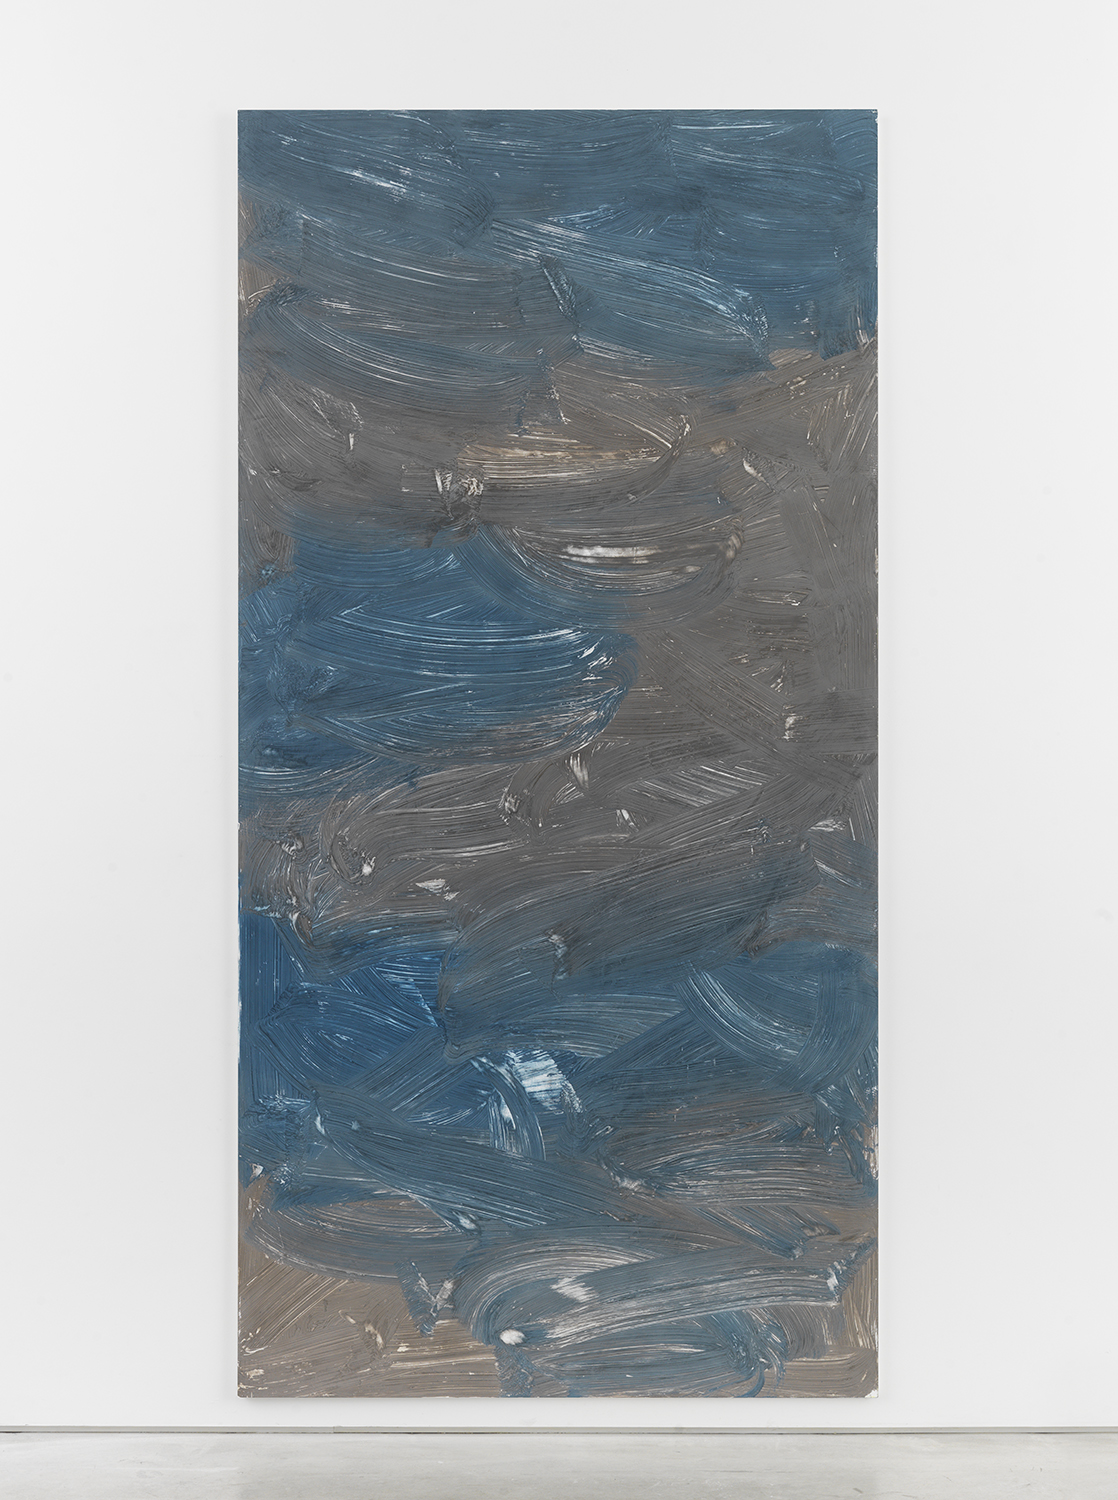 Alex Kwartler, Untitled, 2016, pigmented plaster on plywood, 96 x 48 in.